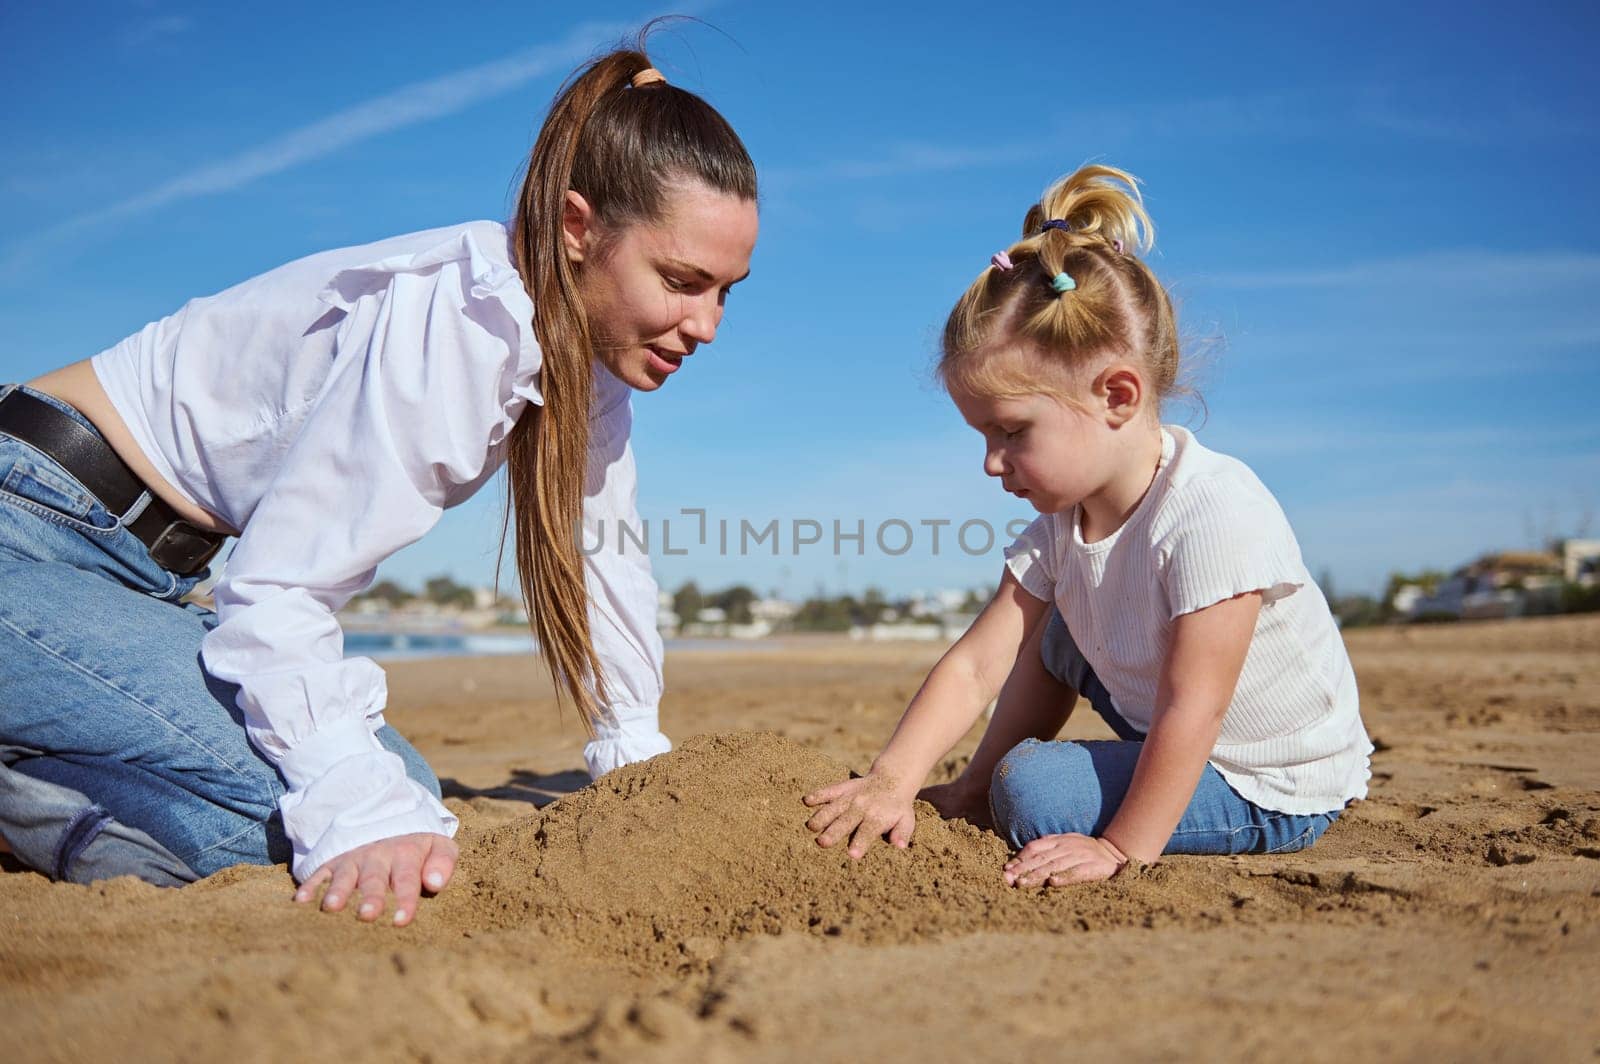 Close up portrait of happy of mother and daughter building castle in sand at beach by artgf